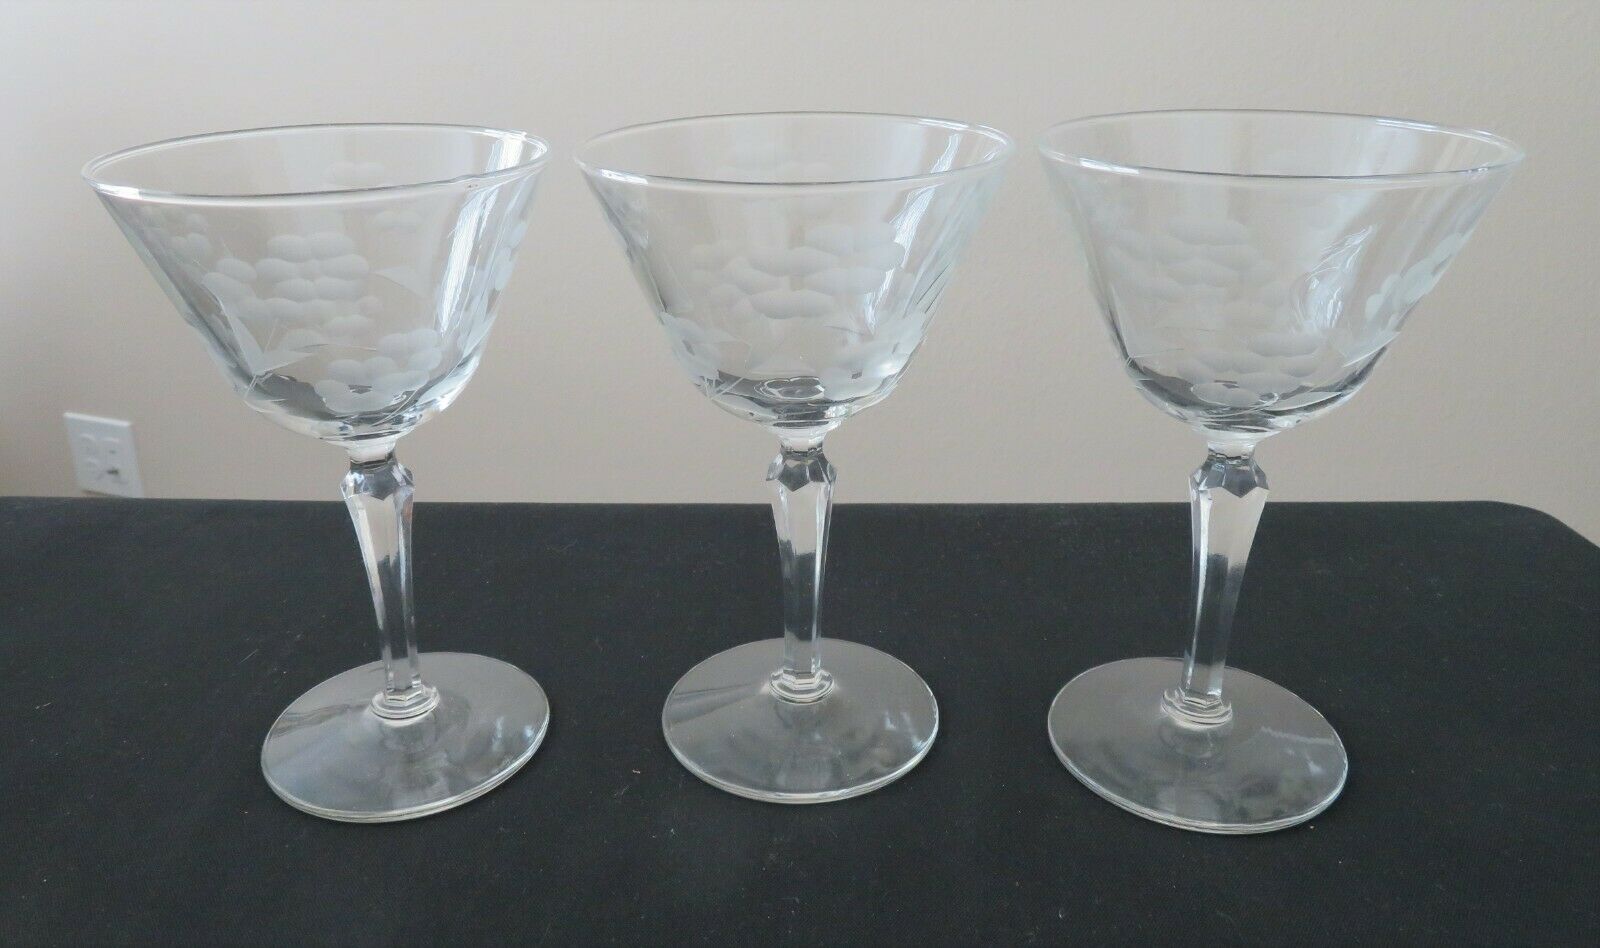 3 Vintage Libbey Embassy Rock Sharpe Gray Cut Floral Champagne Stems1950-60's